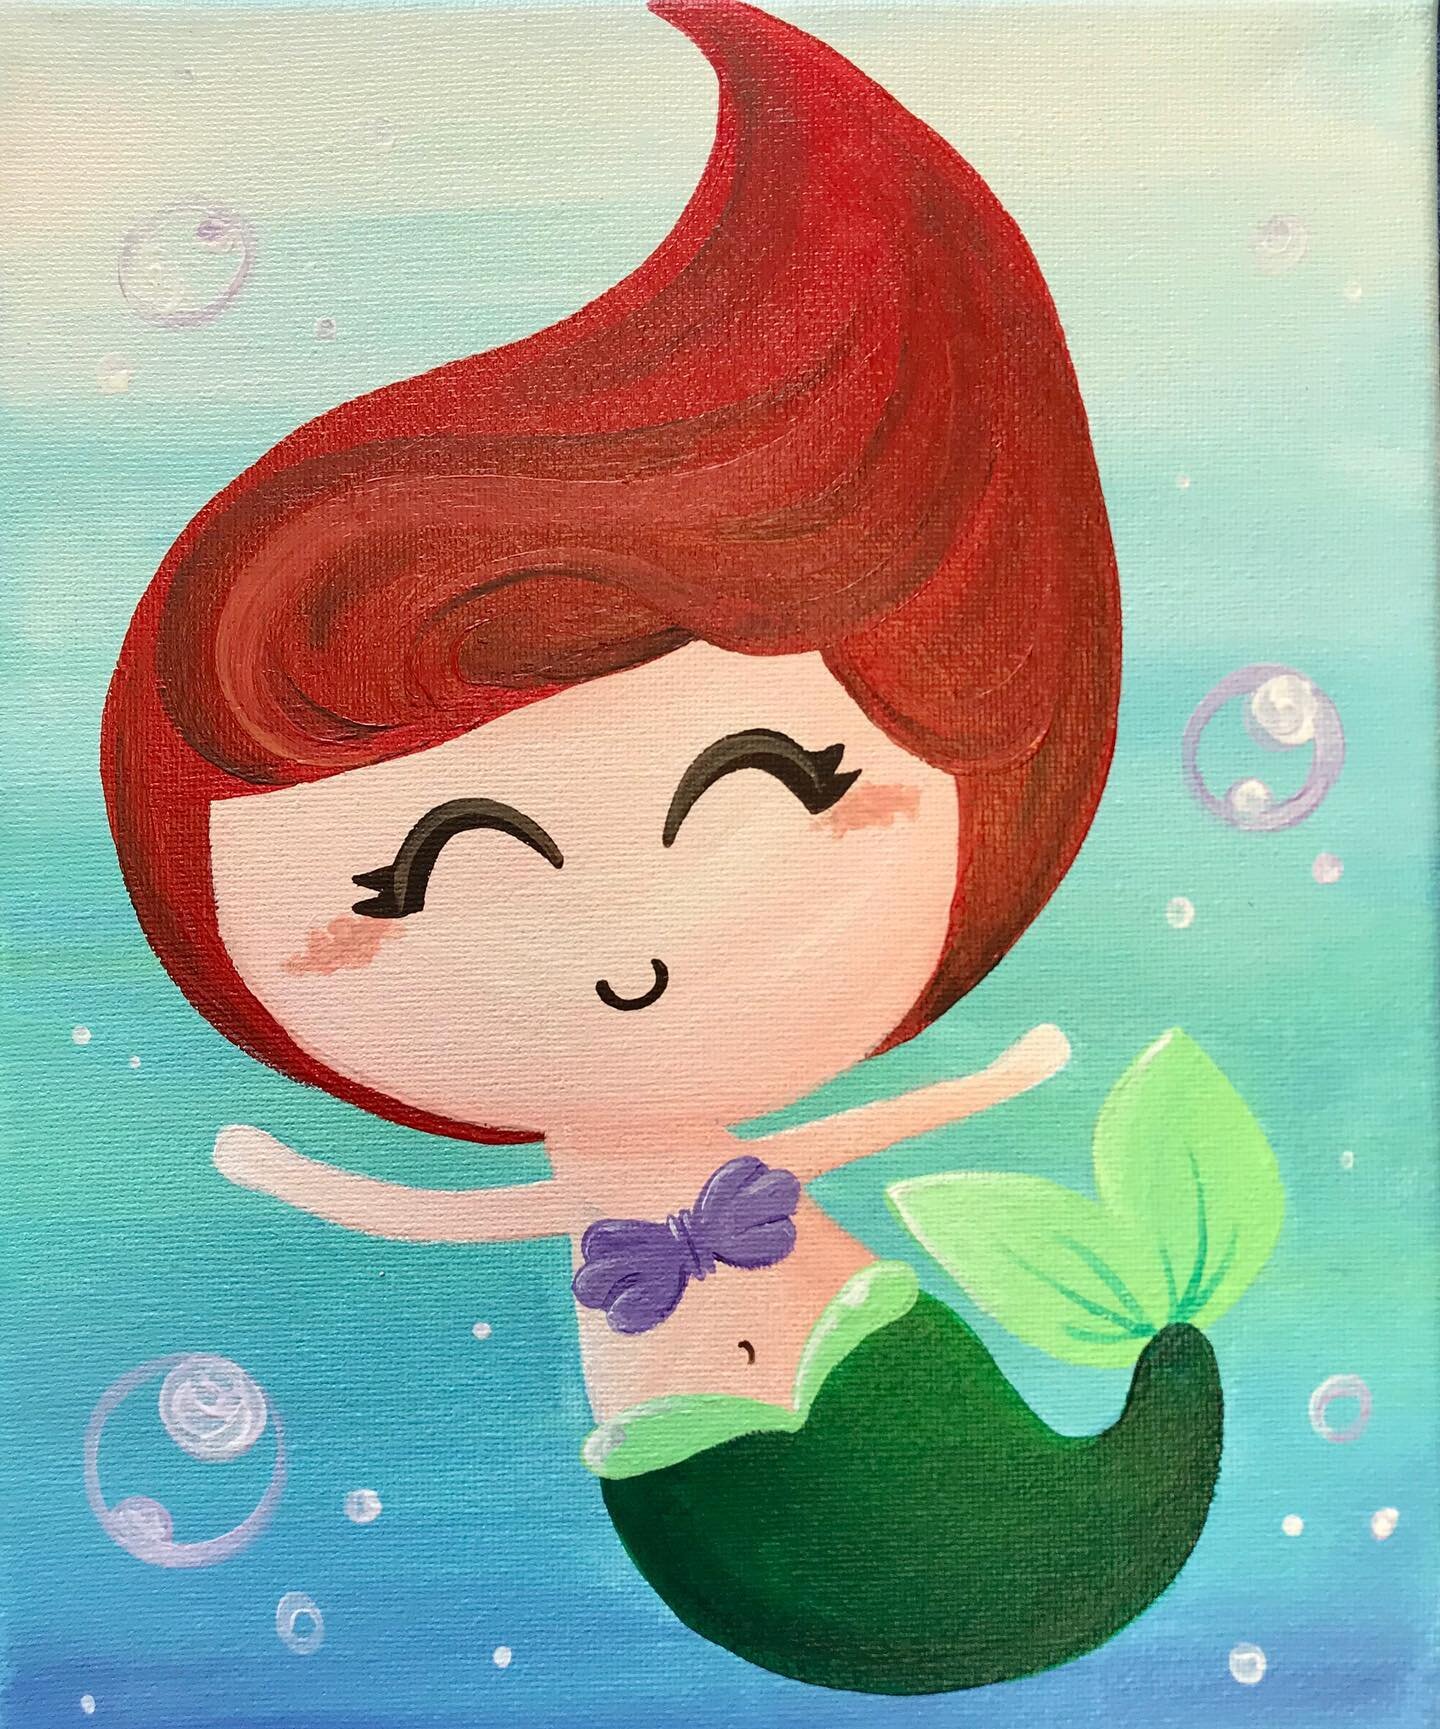 Virtual Mermaid Art Party 

Sunday May 2, 2021 
2:00pm-3:30pm
Ages 6-18+

This hour and a half class we will spend drawing, painting, and creating a mermaid canvas and matching craft. This is a fun, safe, and affordable way for your child to either t